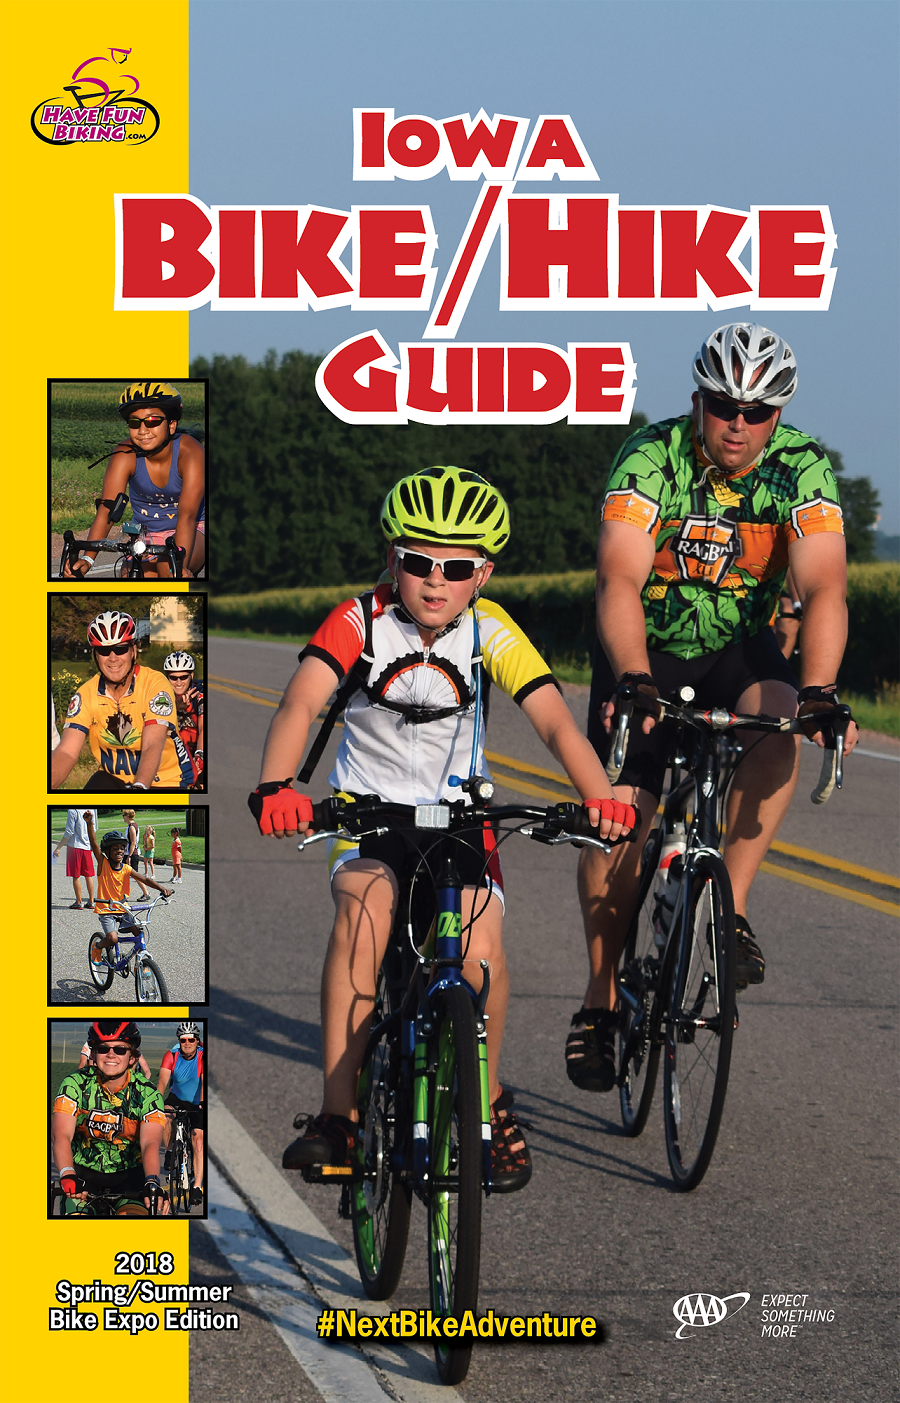 The inaugural Iowa Bike Guide cover you can pick up at the Bike Expo, in Des Moines this Saturday.